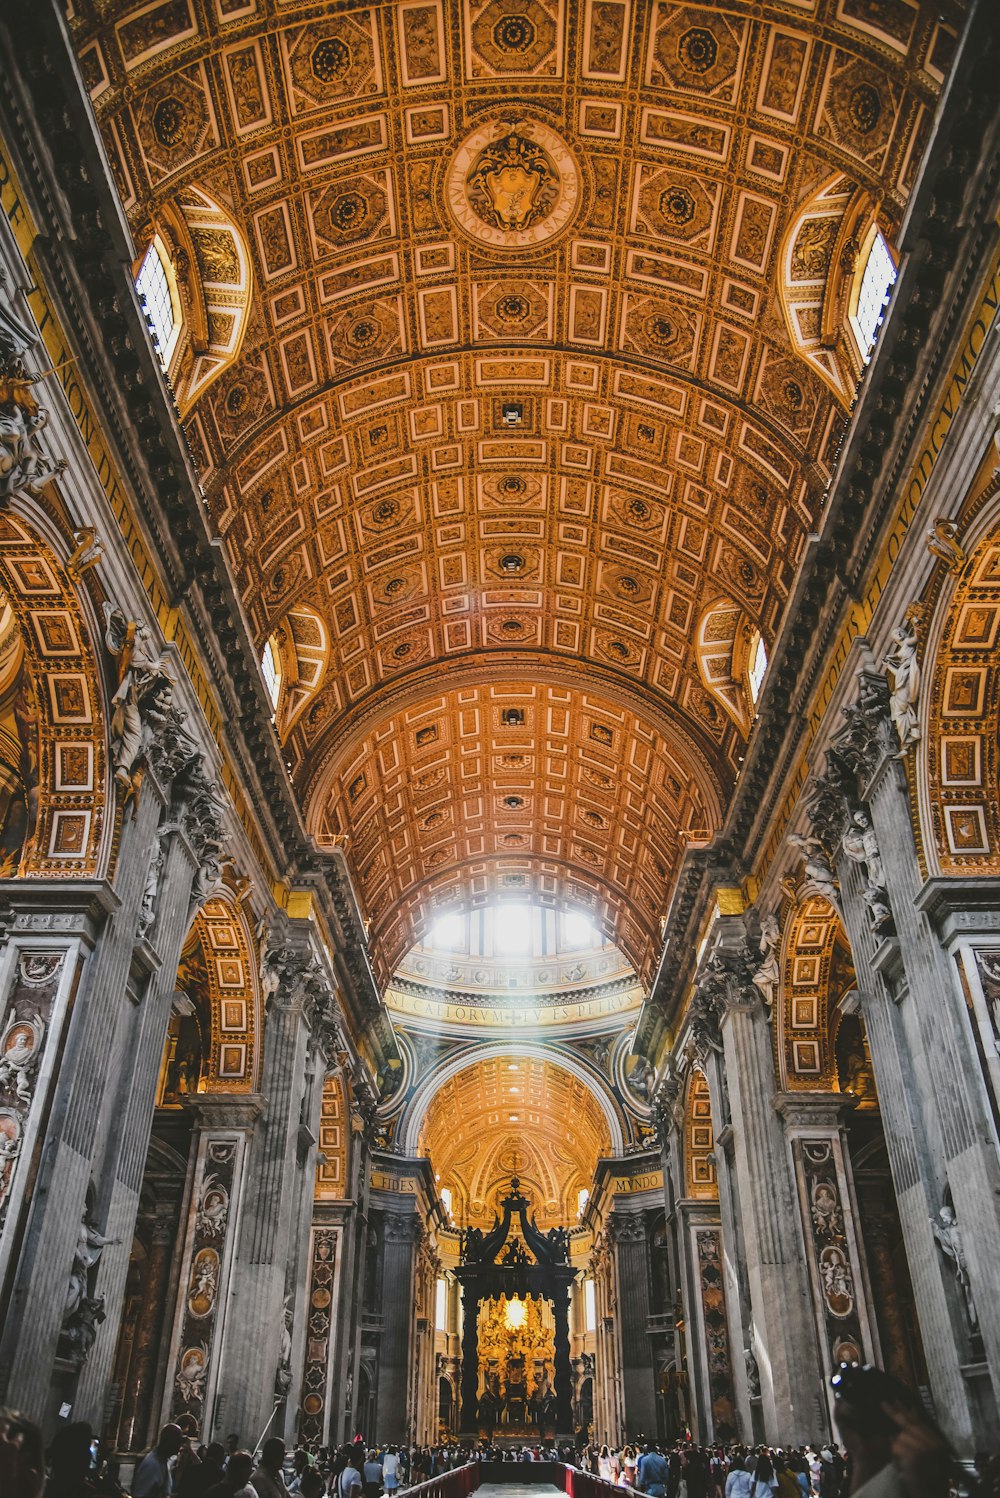 St. Peter's Basilica ceiling